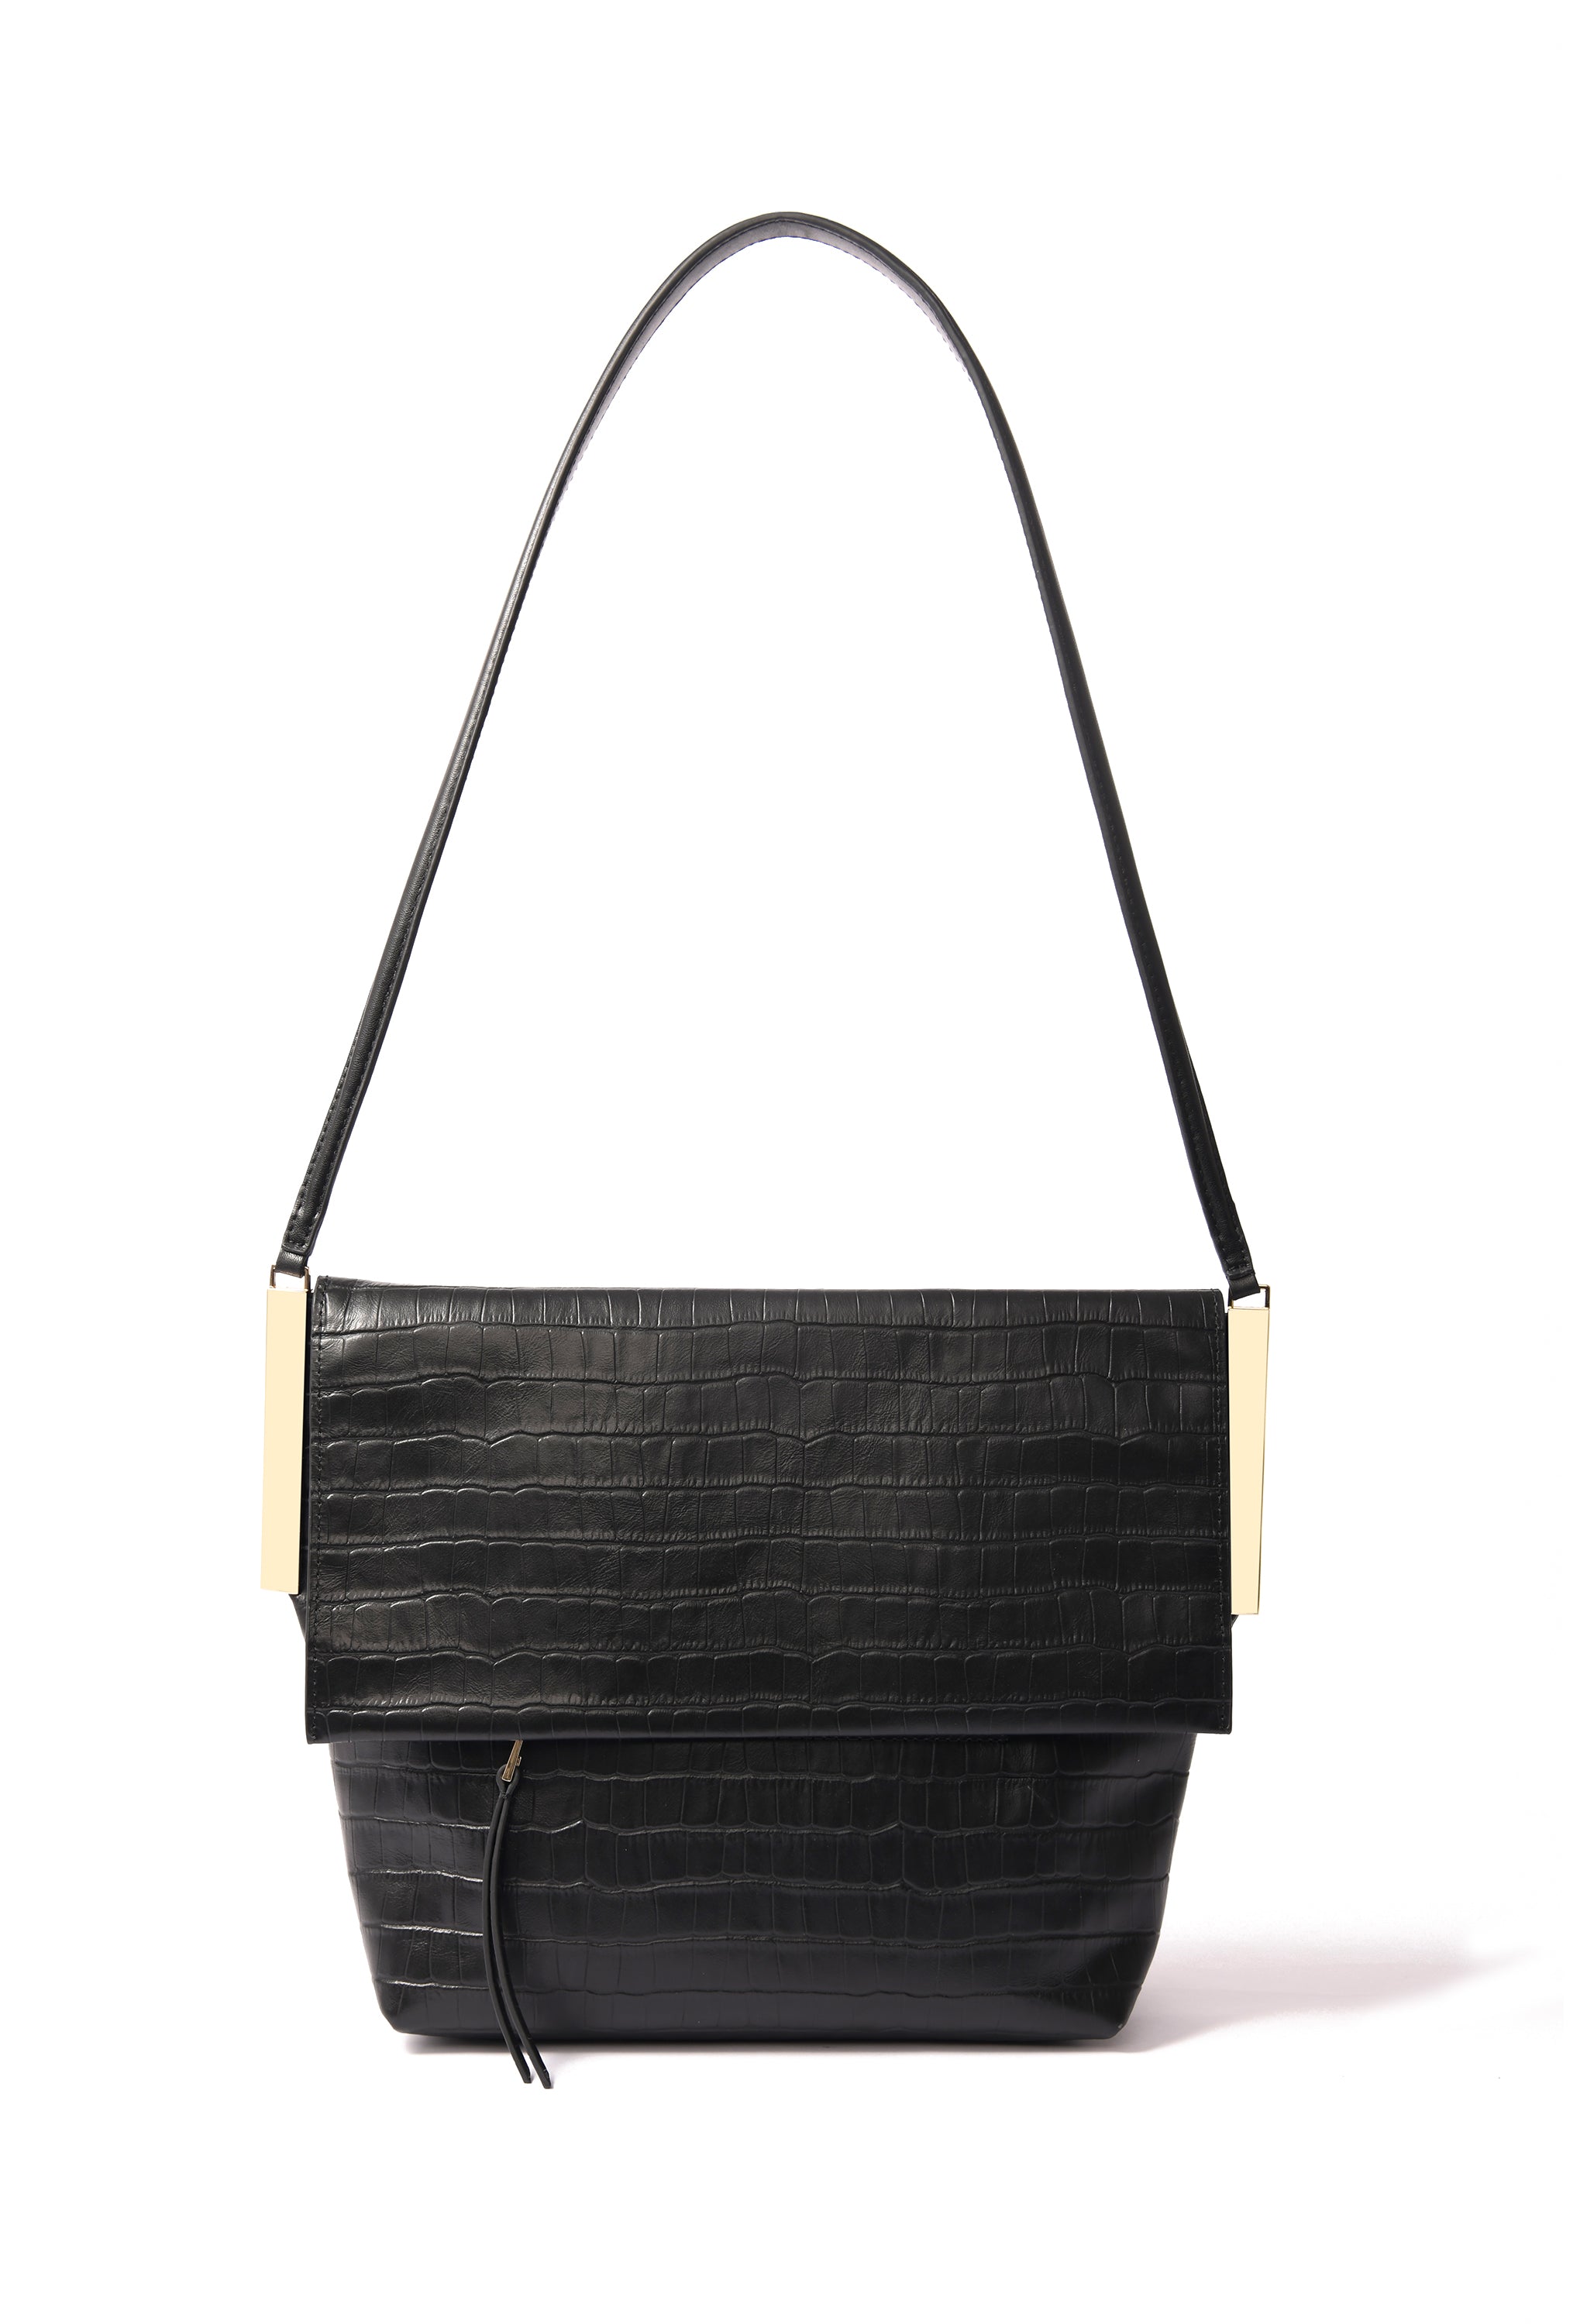 Giselle Bag in croco embossed leather, Black